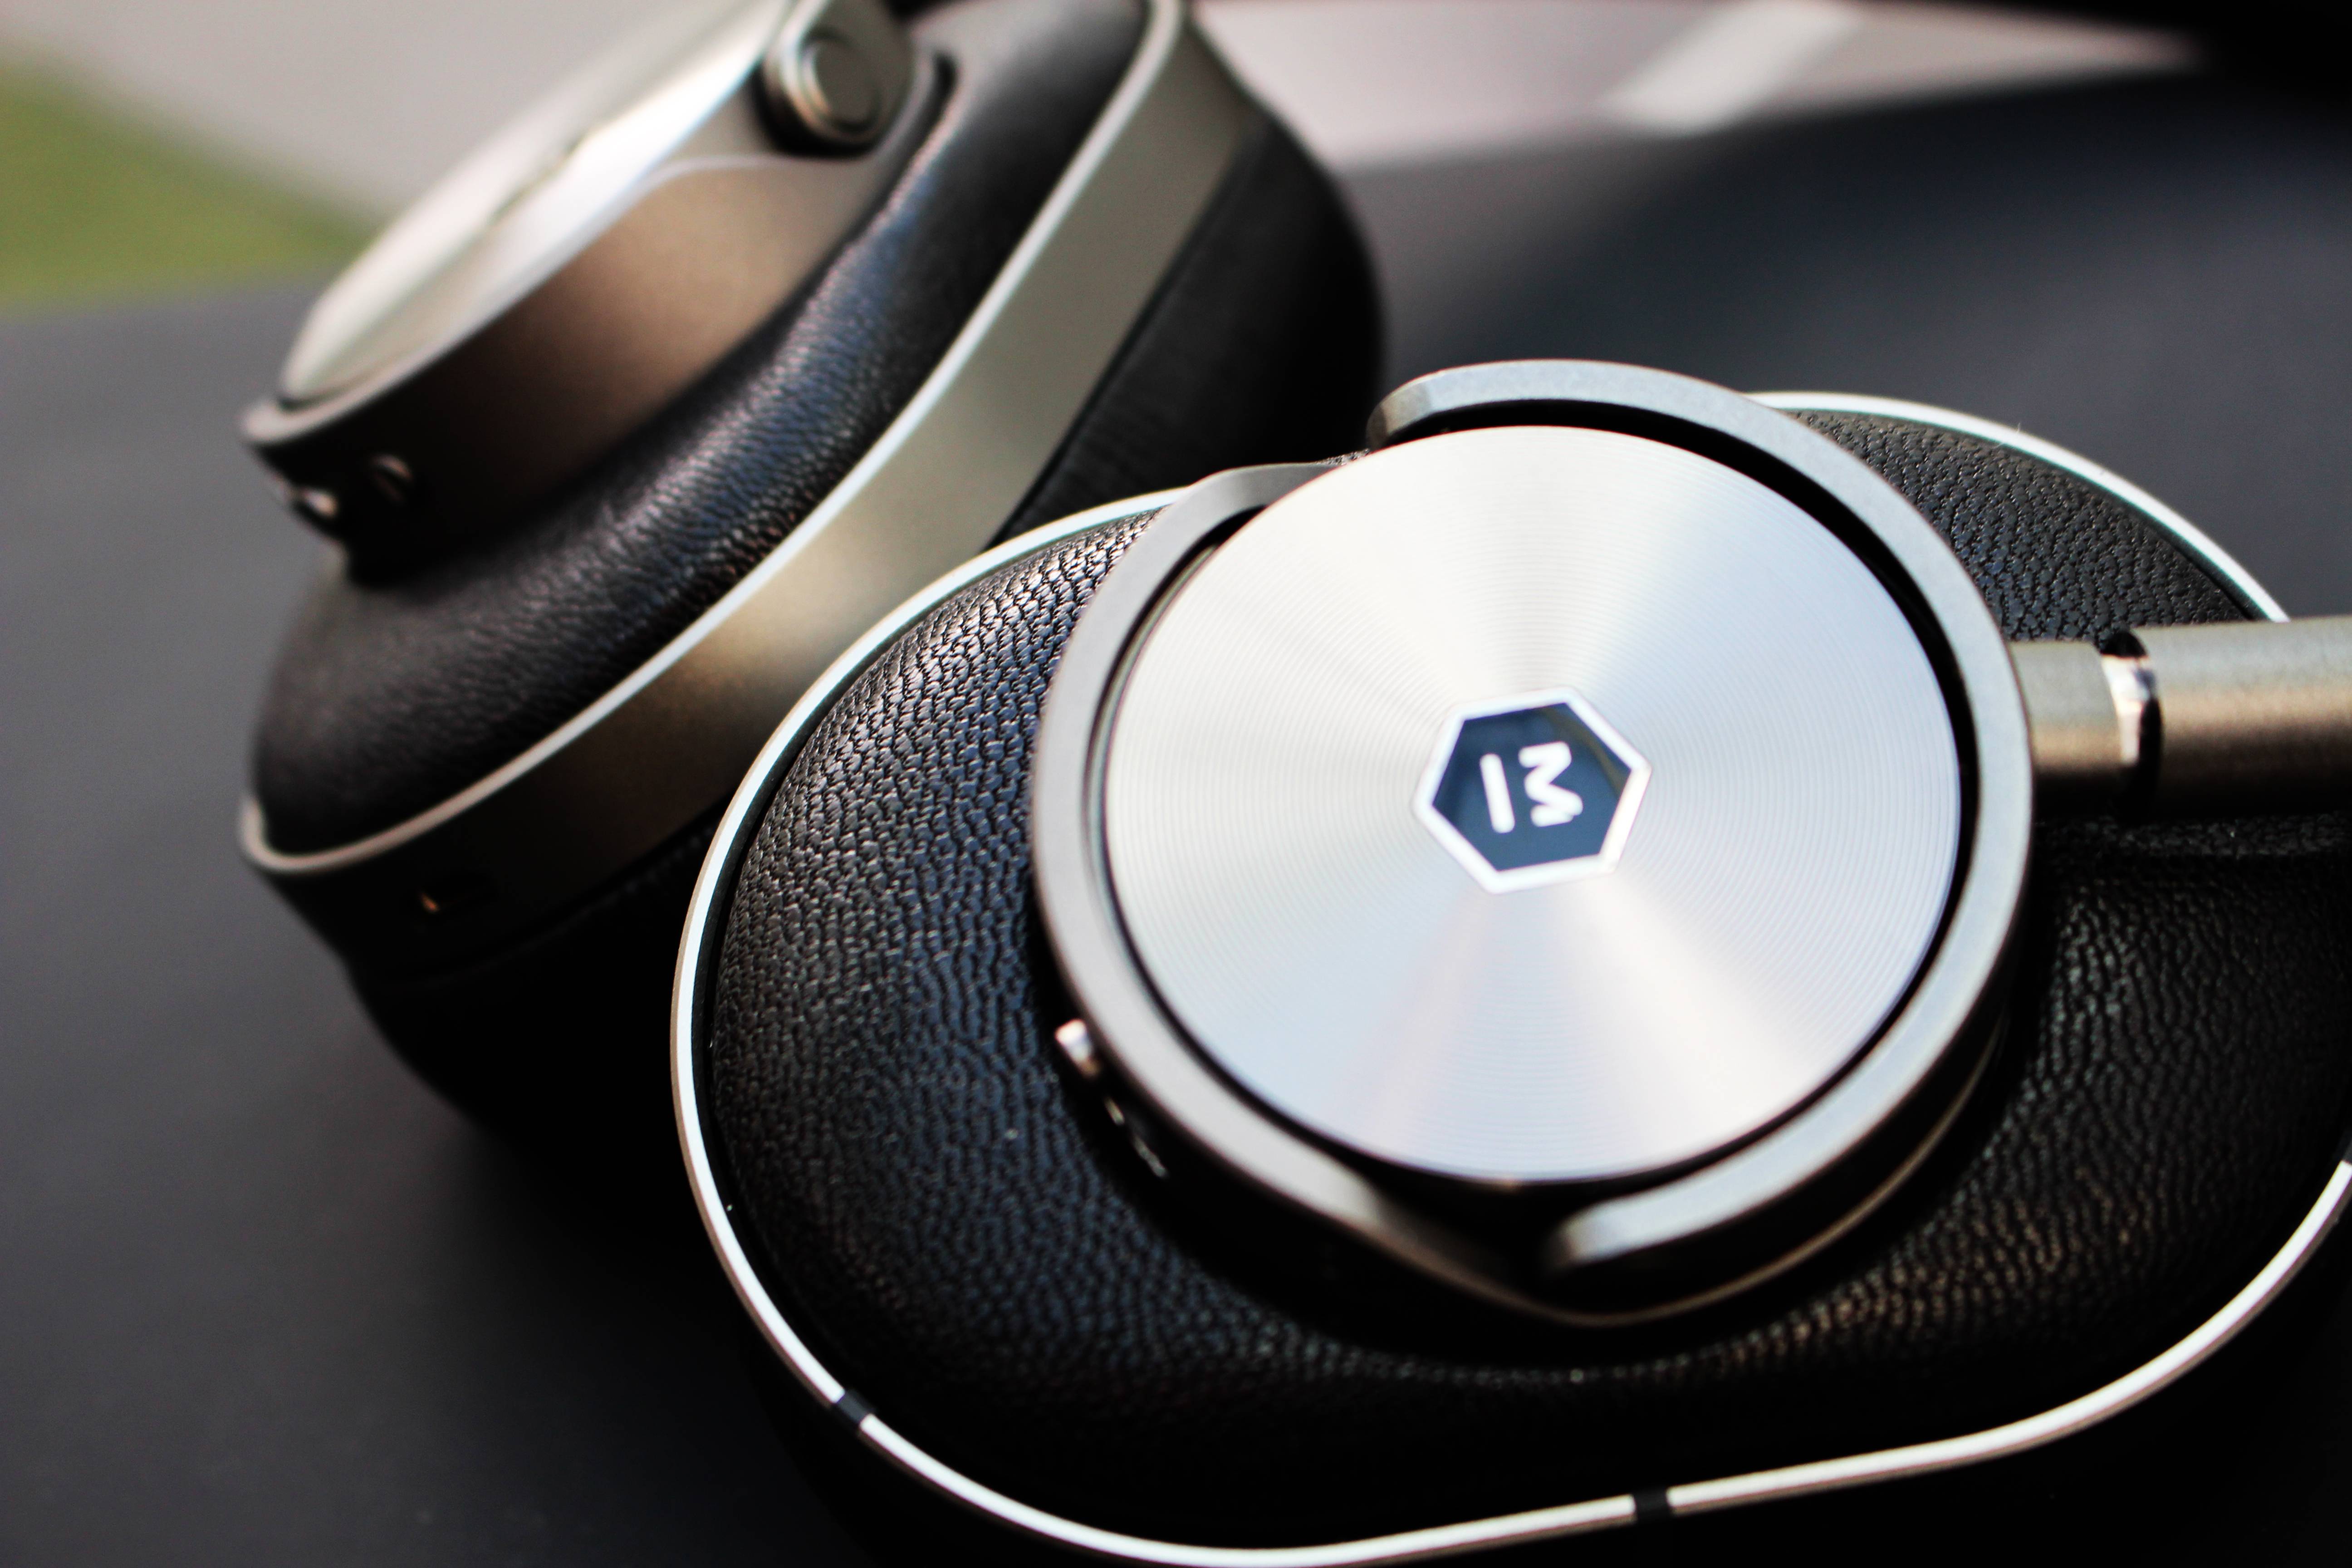 Review: Master & Dynamic MW60 Headphones